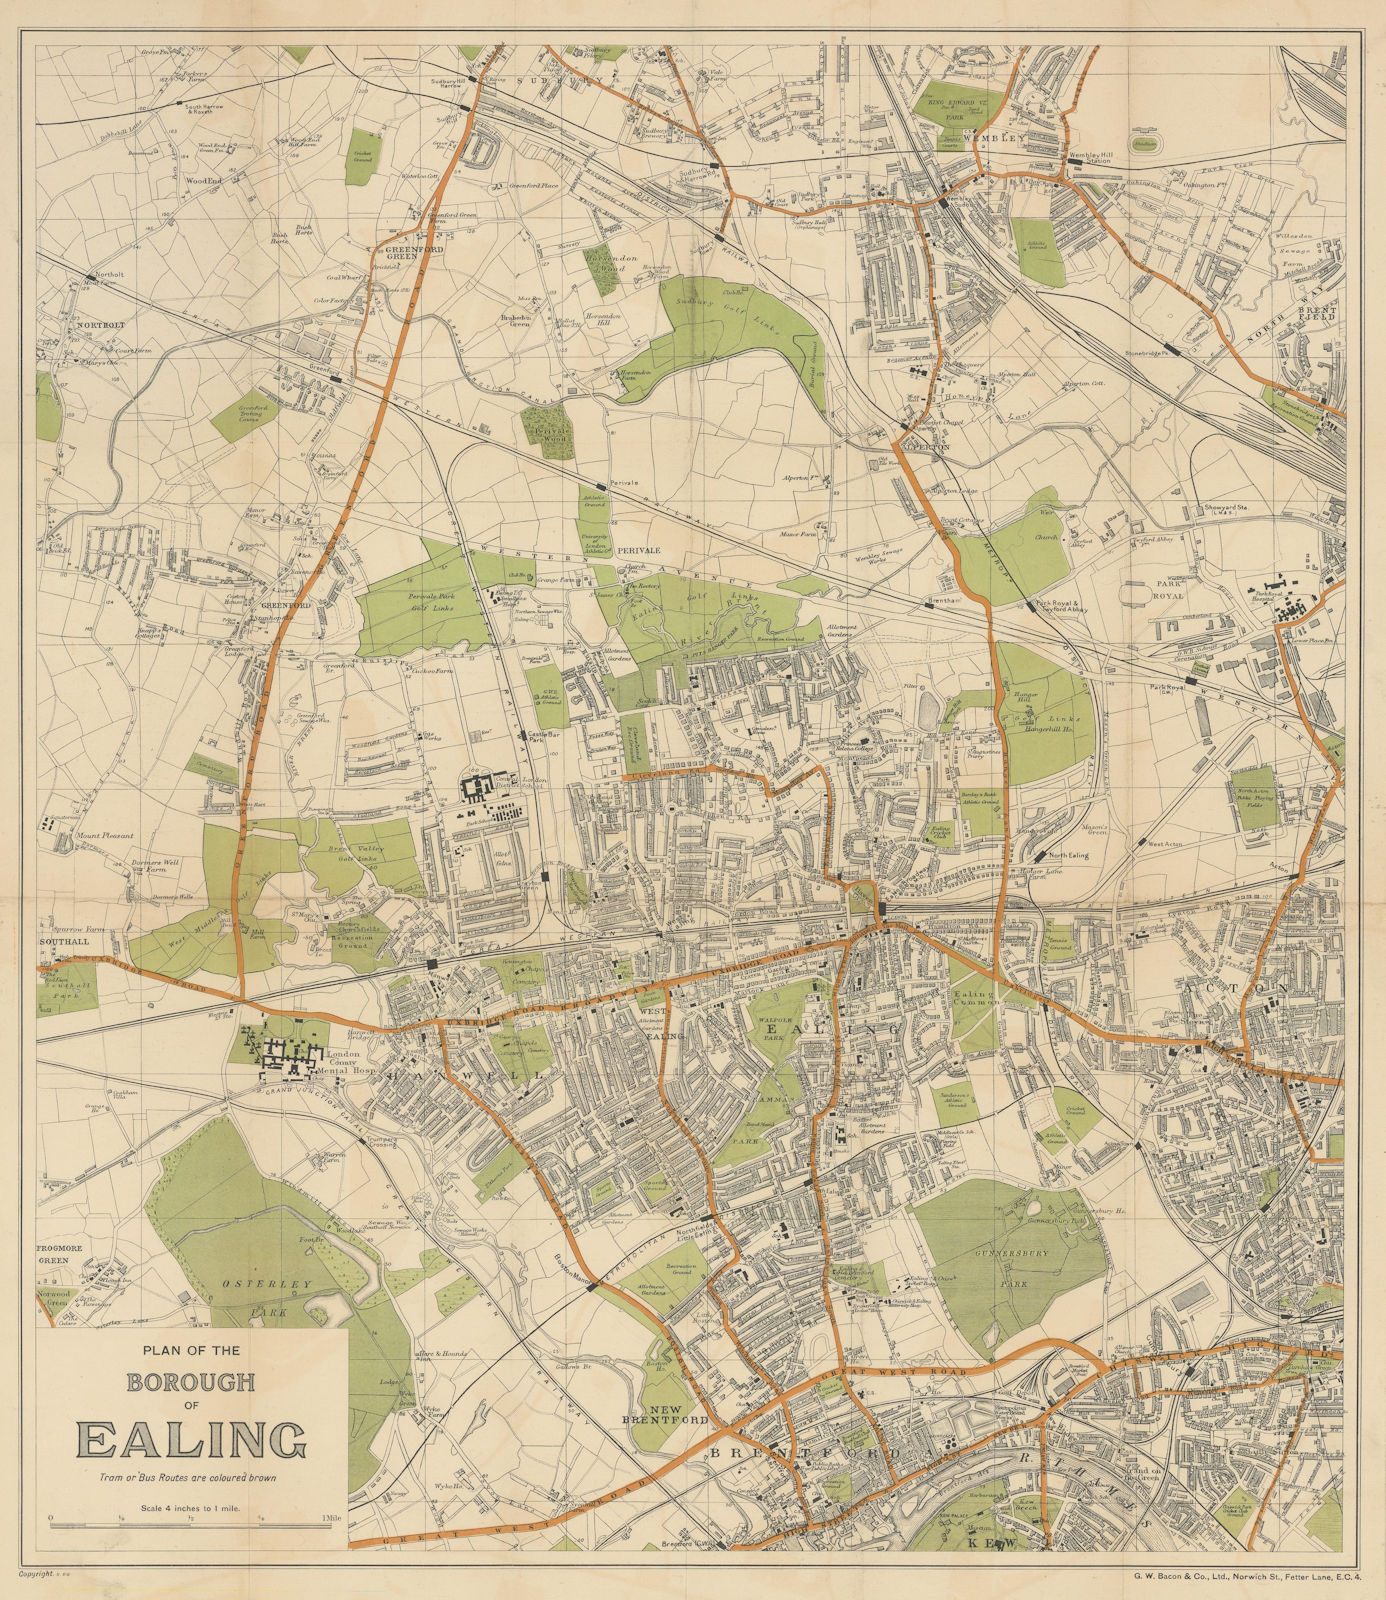 Bacon's Large Scale Plan of Ealing. Acton Brentford Hanwell 57x50cm c1930 map